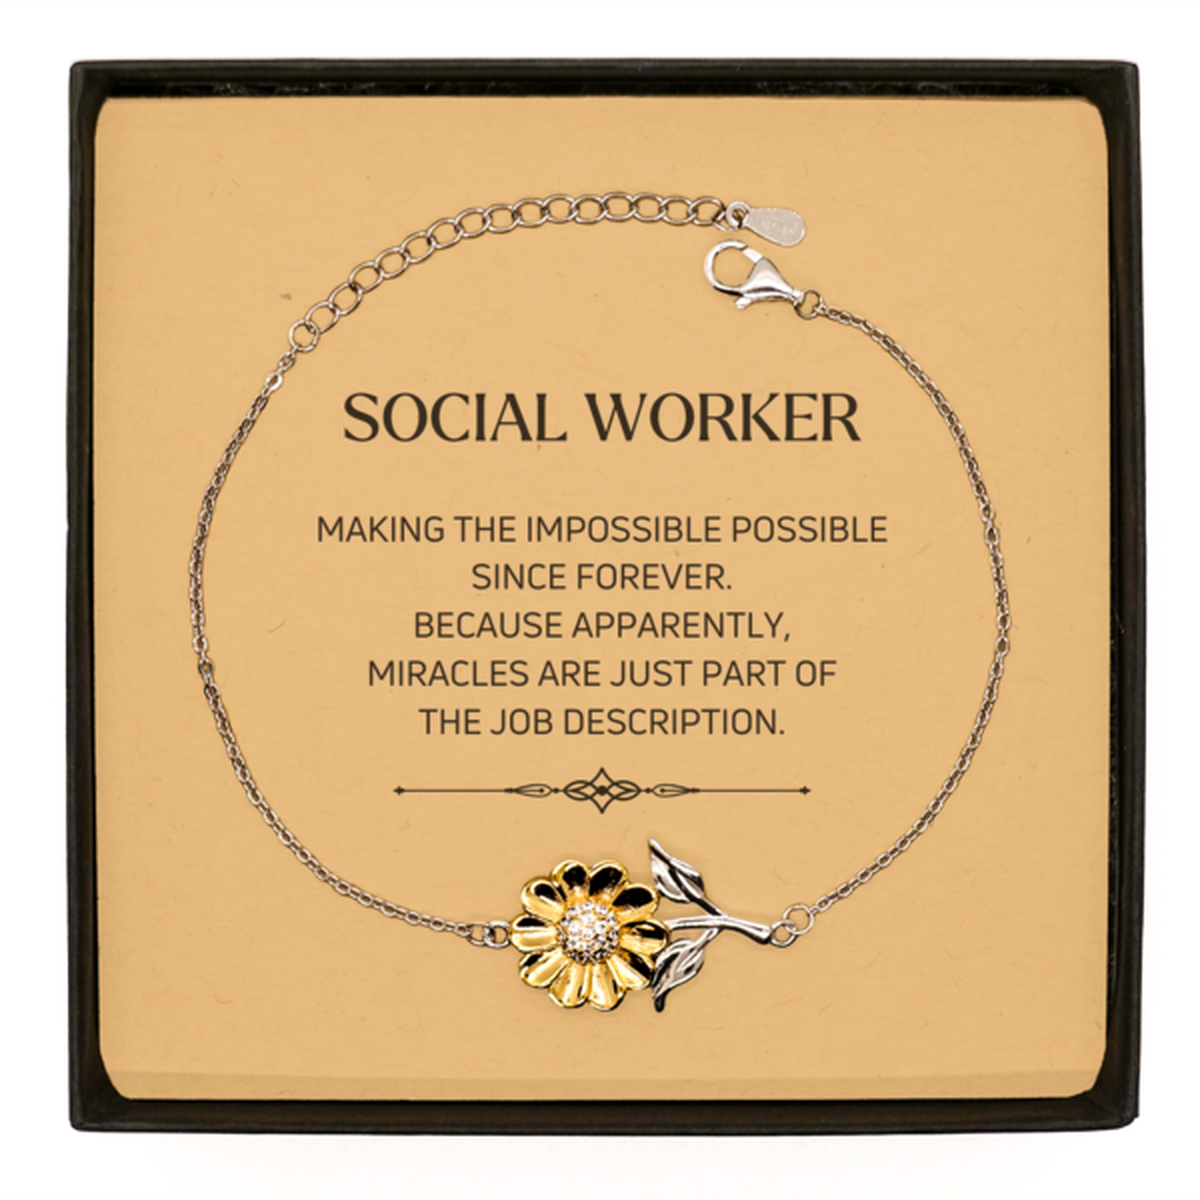 Funny Social Worker Gifts, Miracles are just part of the job description, Inspirational Birthday Sunflower Bracelet For Social Worker, Men, Women, Coworkers, Friends, Boss